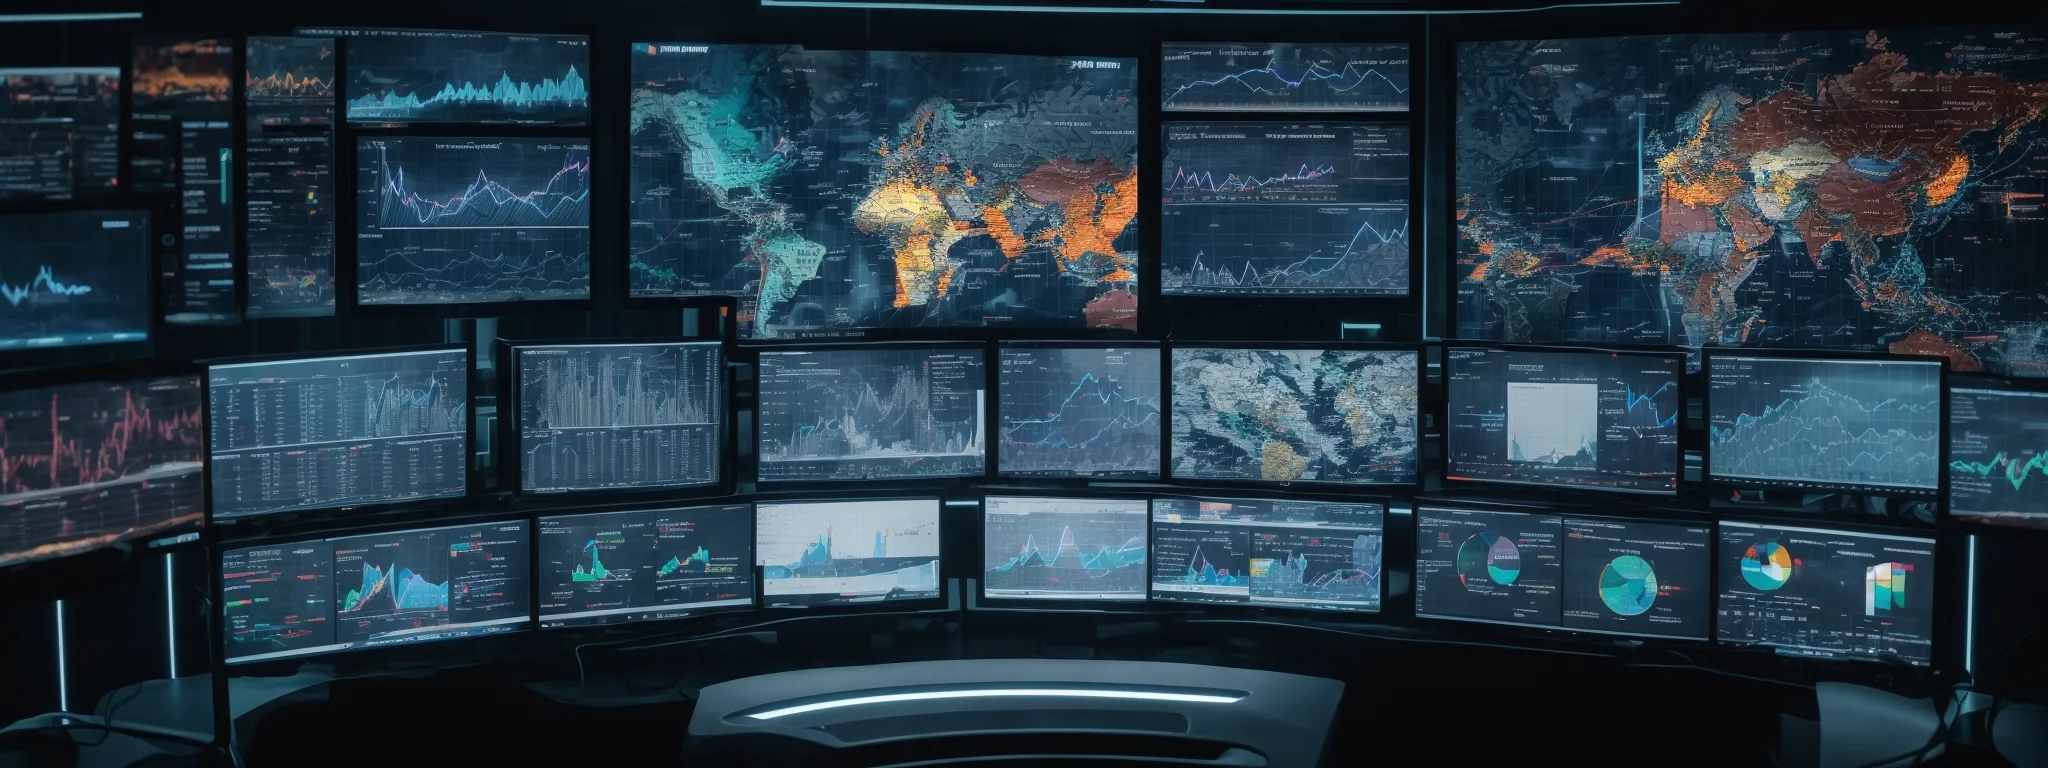 a close-up view of a futuristic workstation with multiple screens displaying graphs, analytics, and a digital world map, symbolizing a high-tech seo strategy analysis.